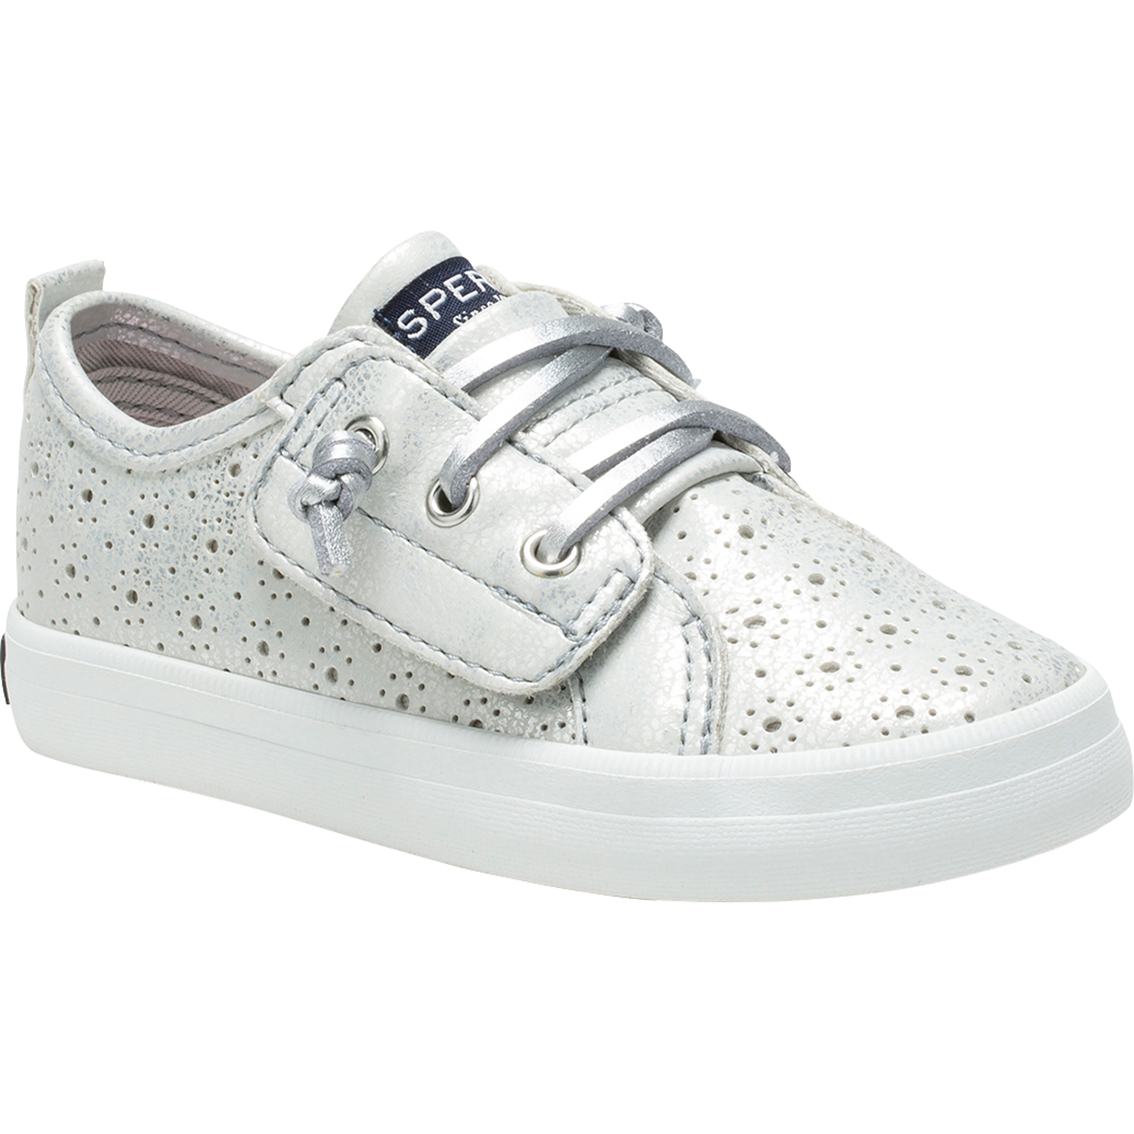 sperry baby shoes girl